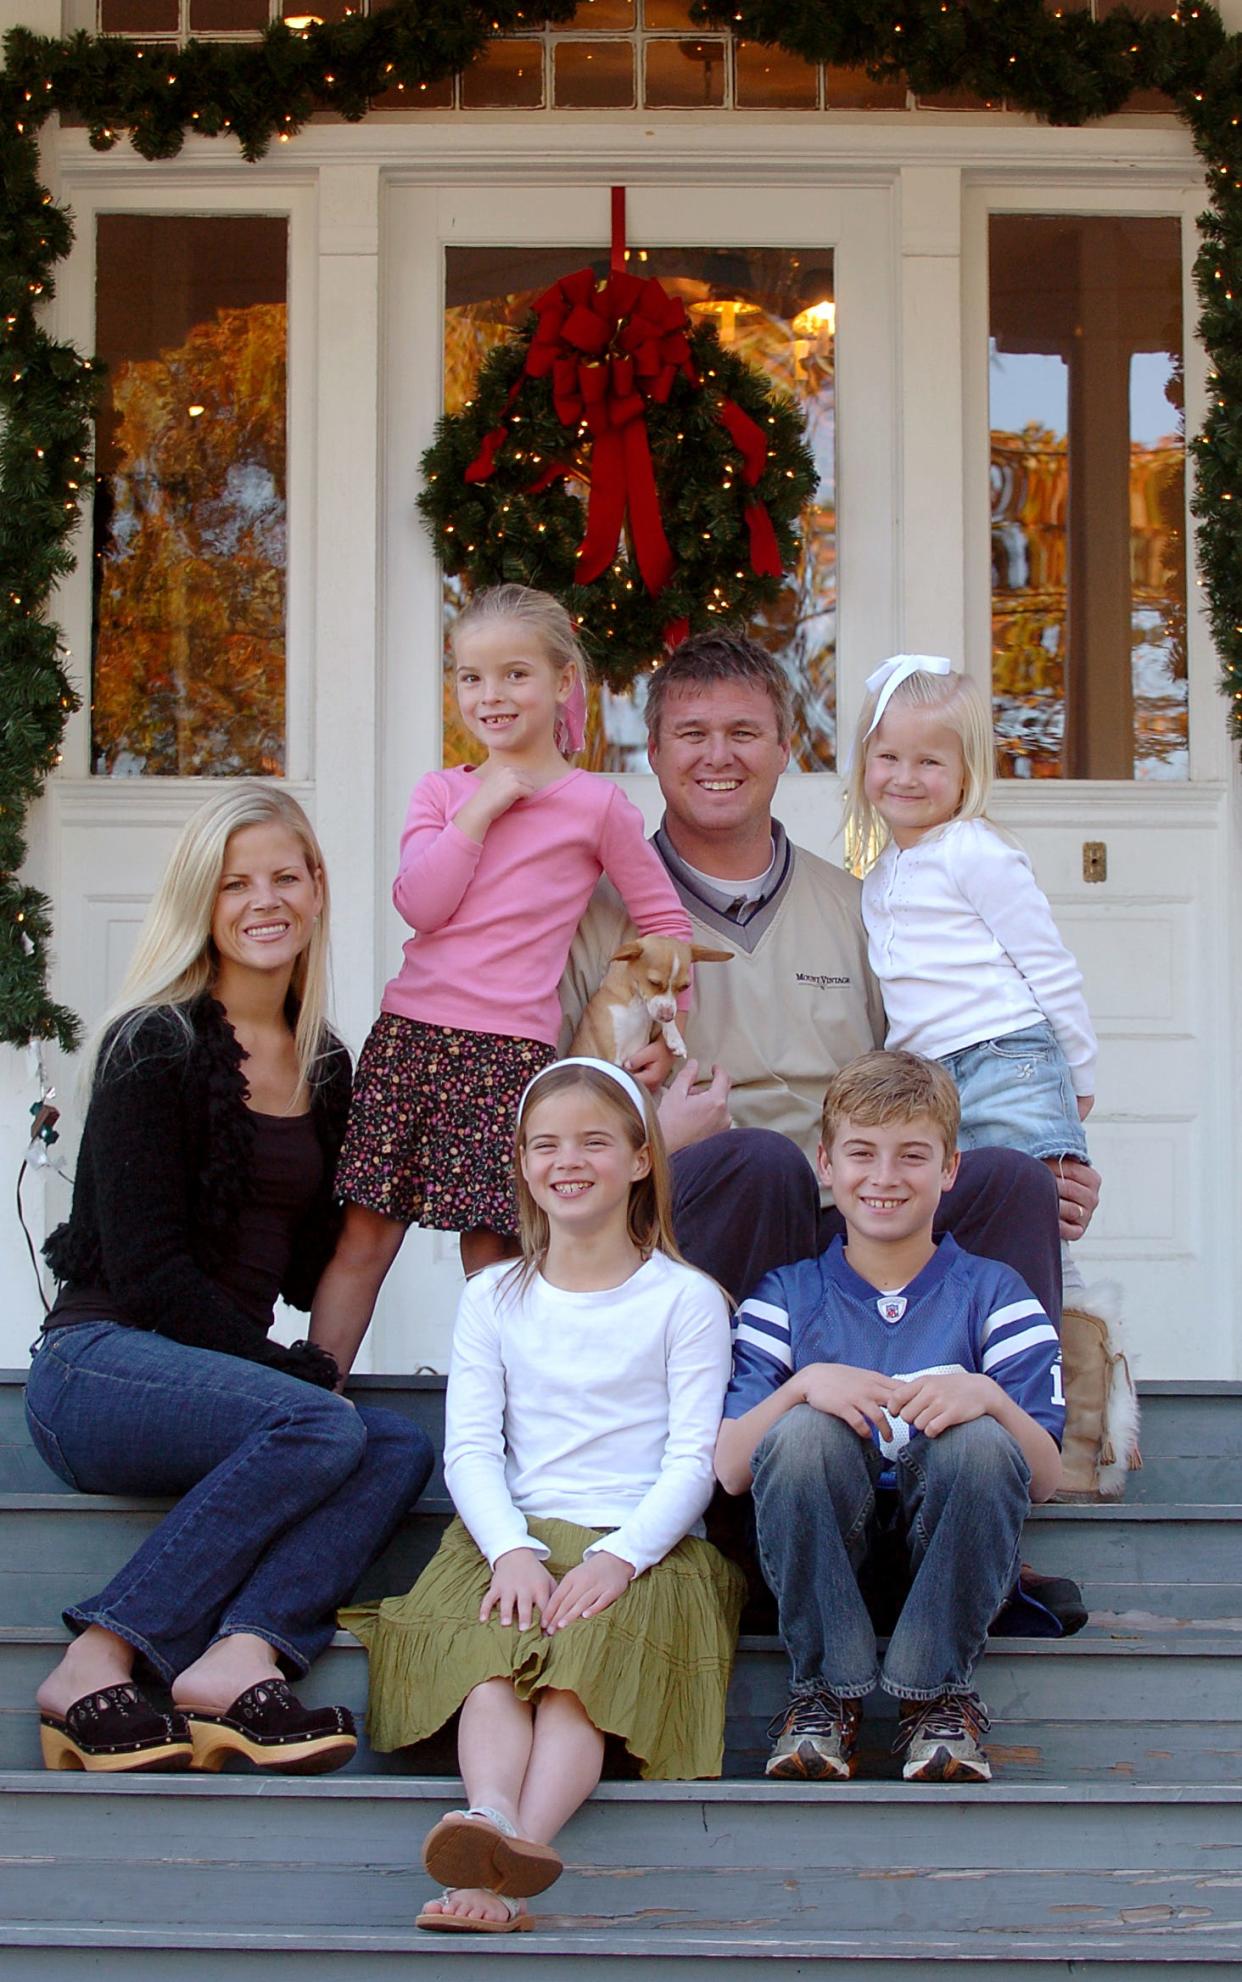 In December 2006, the then-Morris family posed for a photo on the front porch of their home in Augusta, Ga., which was the subject of a story in The Augusta Chronicle. Pictured left to right, Venus, Alexis, then 6, Tripp, and Sydney, then 4, and bottom row, Julia, then 8, and John, then 10.